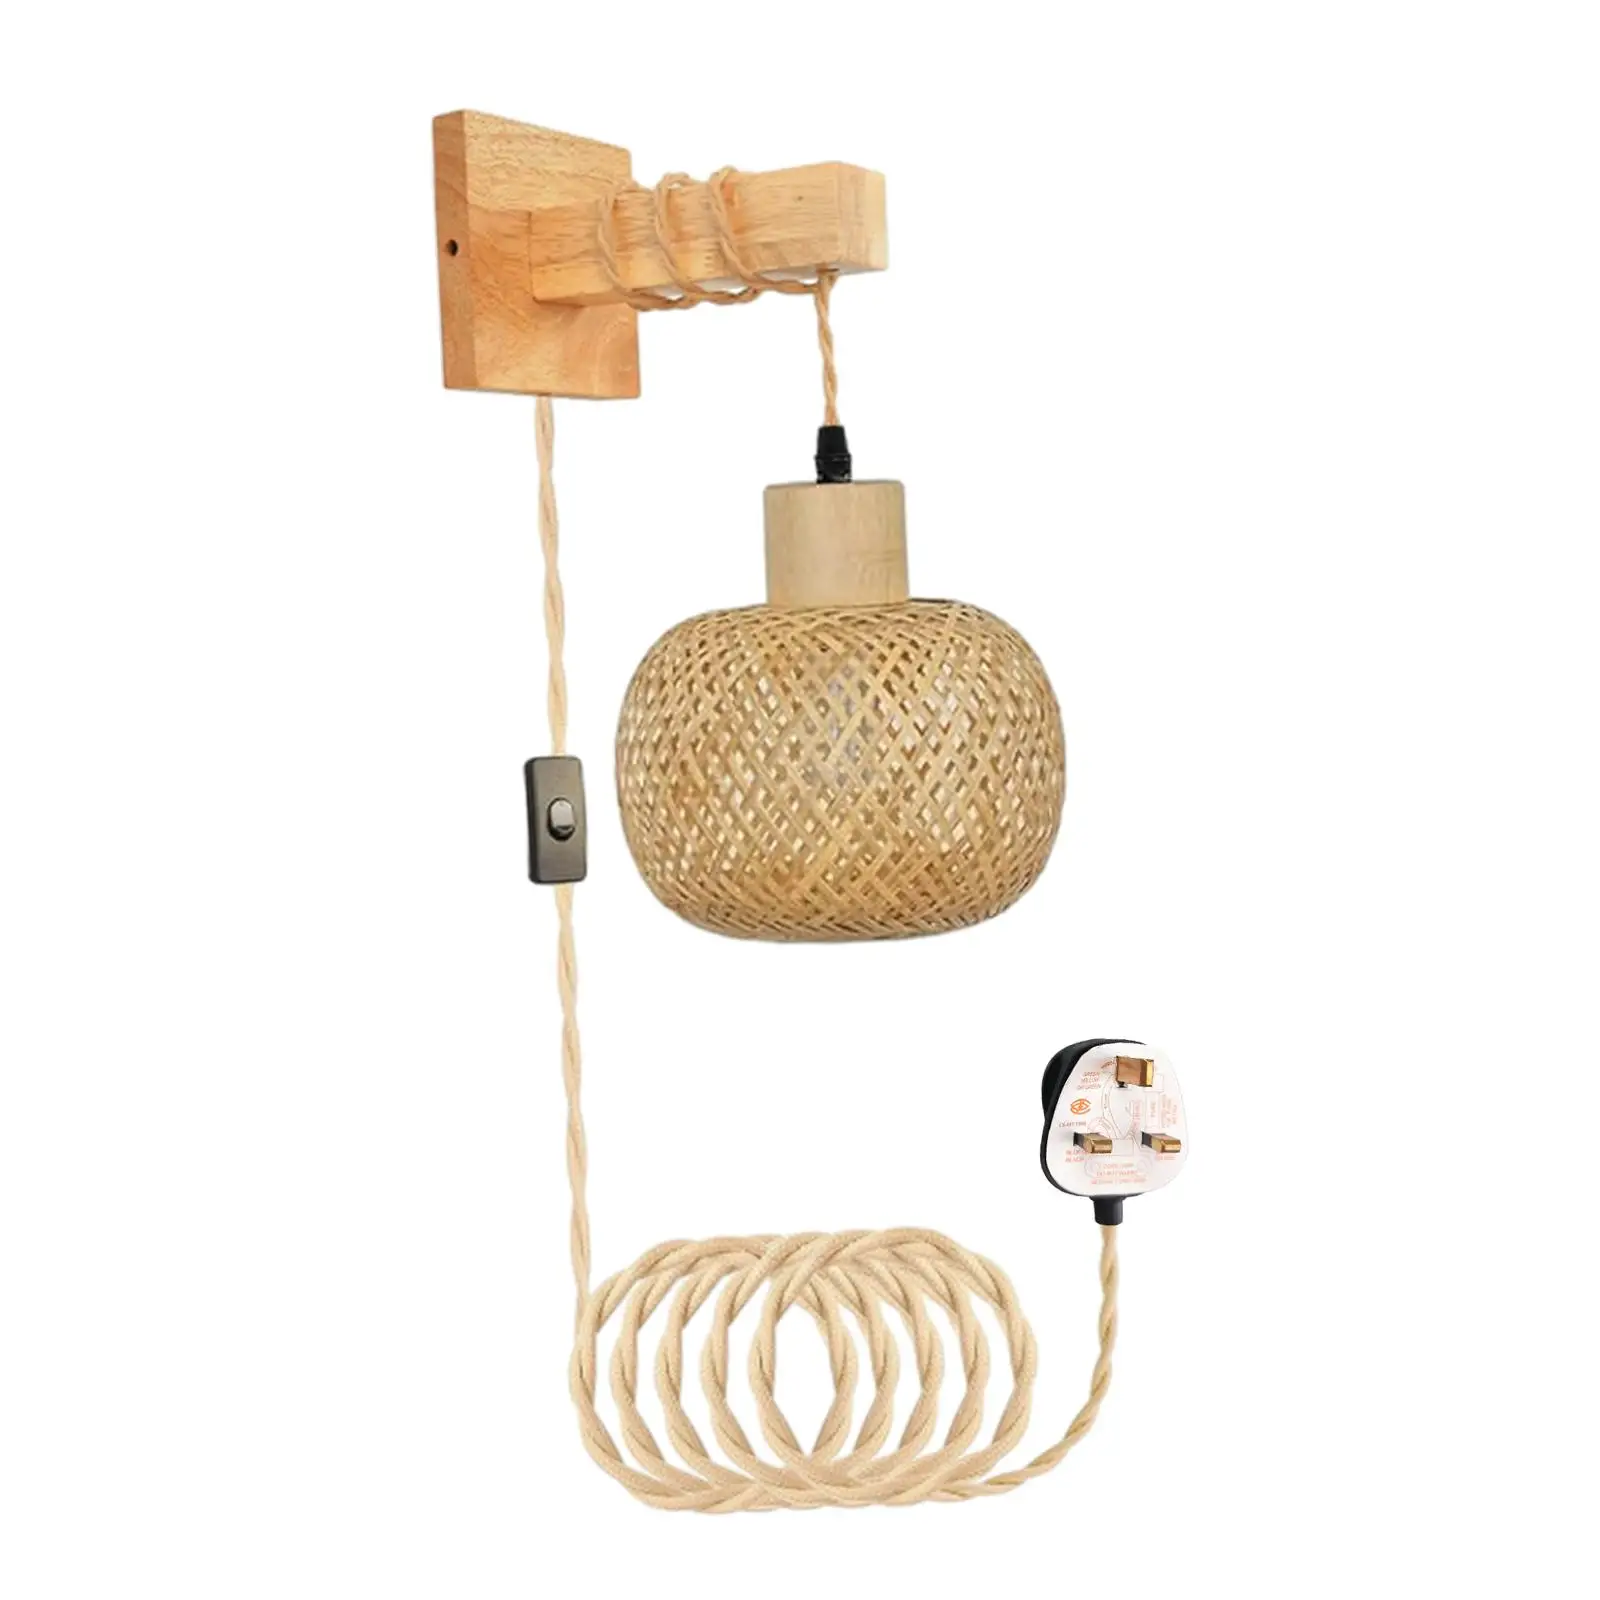 Bamboo Wall Sconce Boho Decor Rustic Plug in Pendant Light Farmhouse Hanging Lamp for Stairs Kitchen Balcony Home Reading